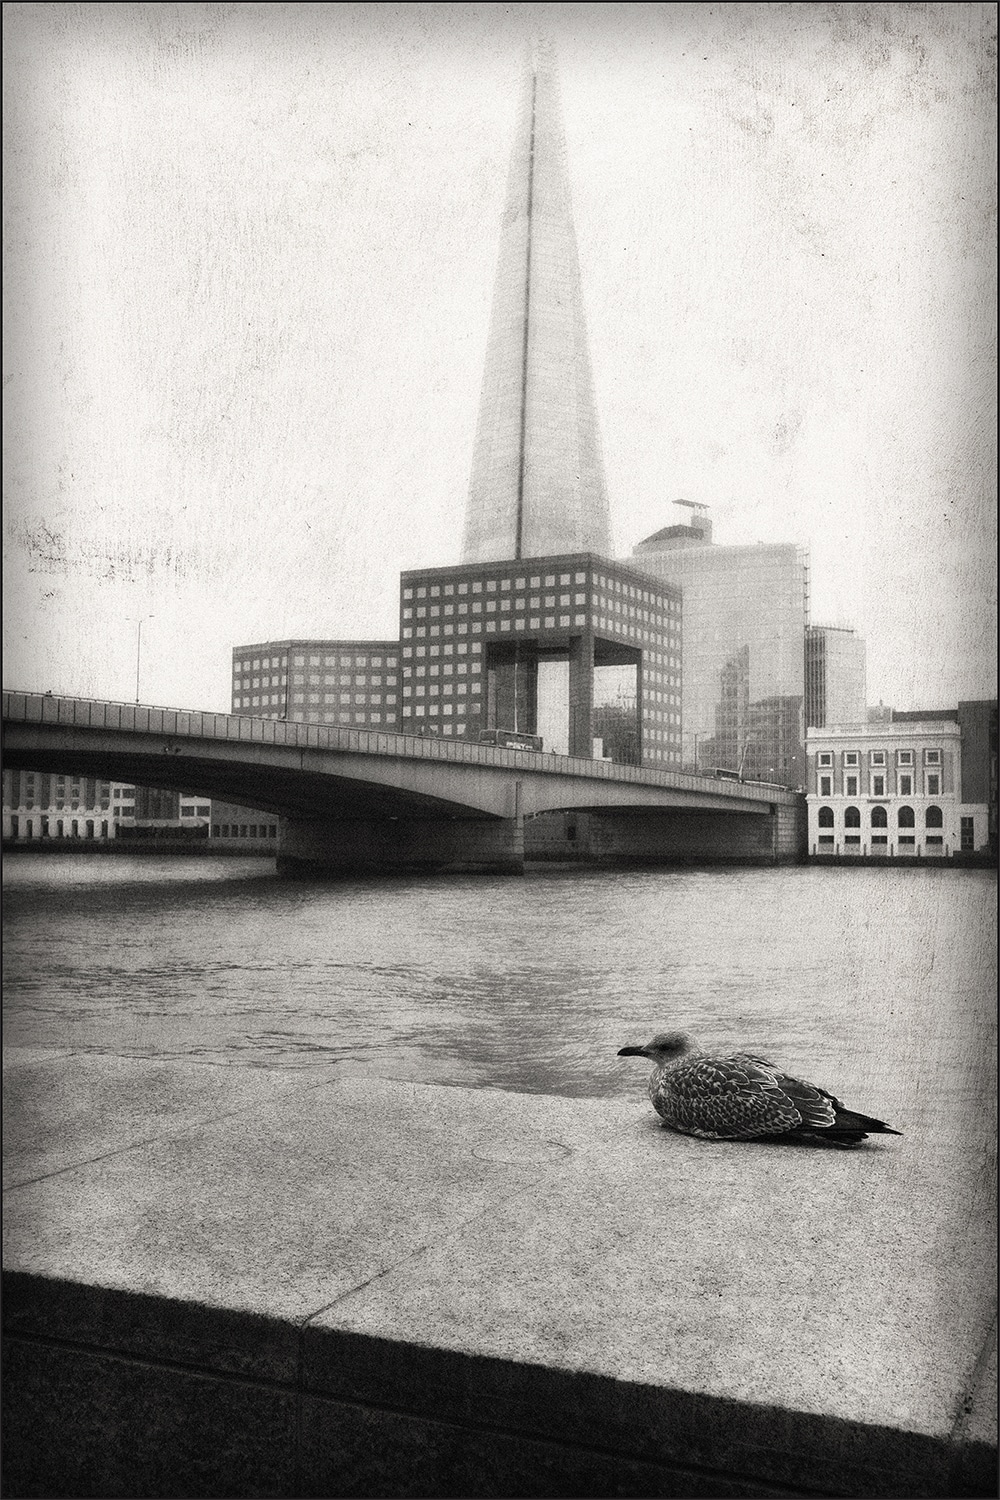 Tracy Ponich: The Shard, London